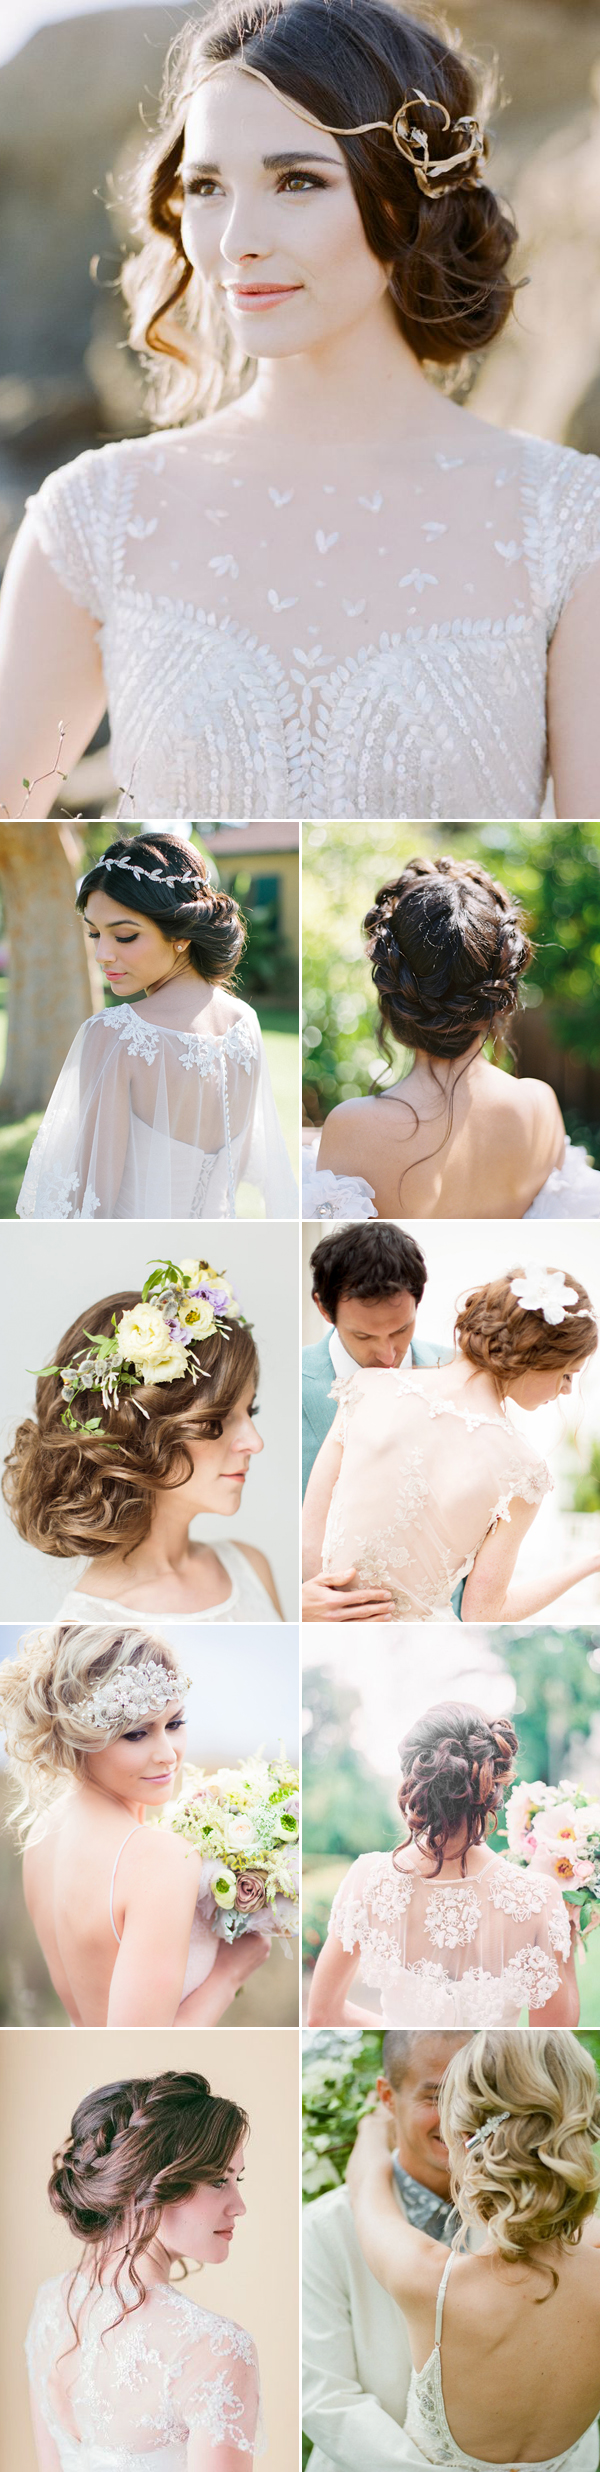 messy updo wedding hairstyles for long hair